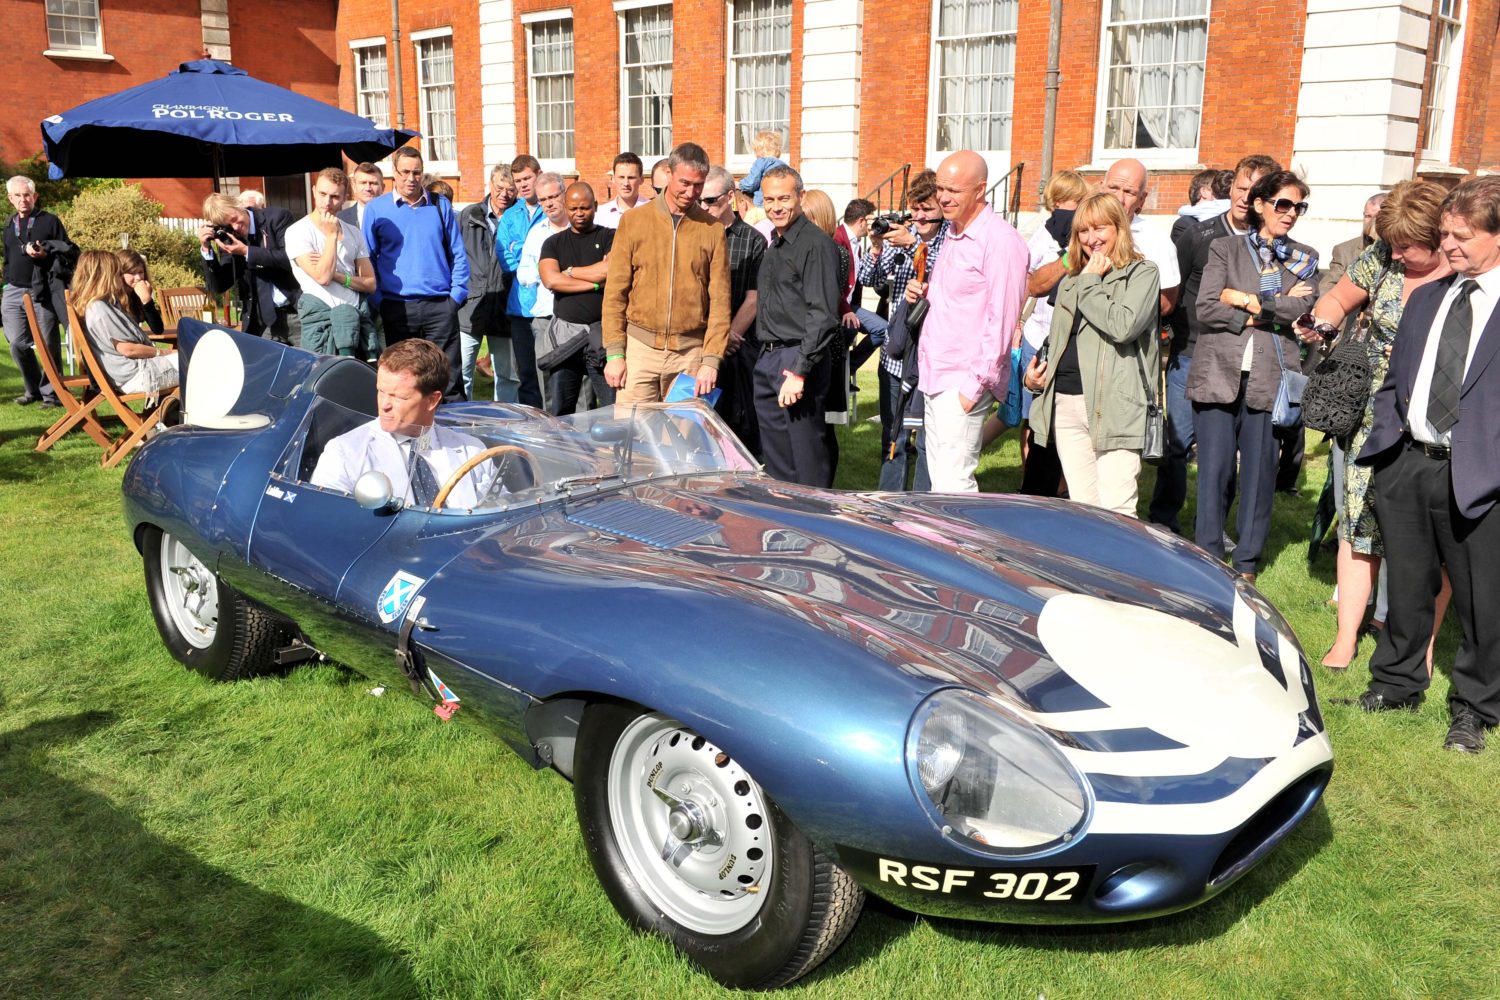 TALKING CONCOURS WILL GET PEOPLE TALKING AT THE 2014 CONCOURS OF ELEGANCE AT HAMPTON COURT PALACE